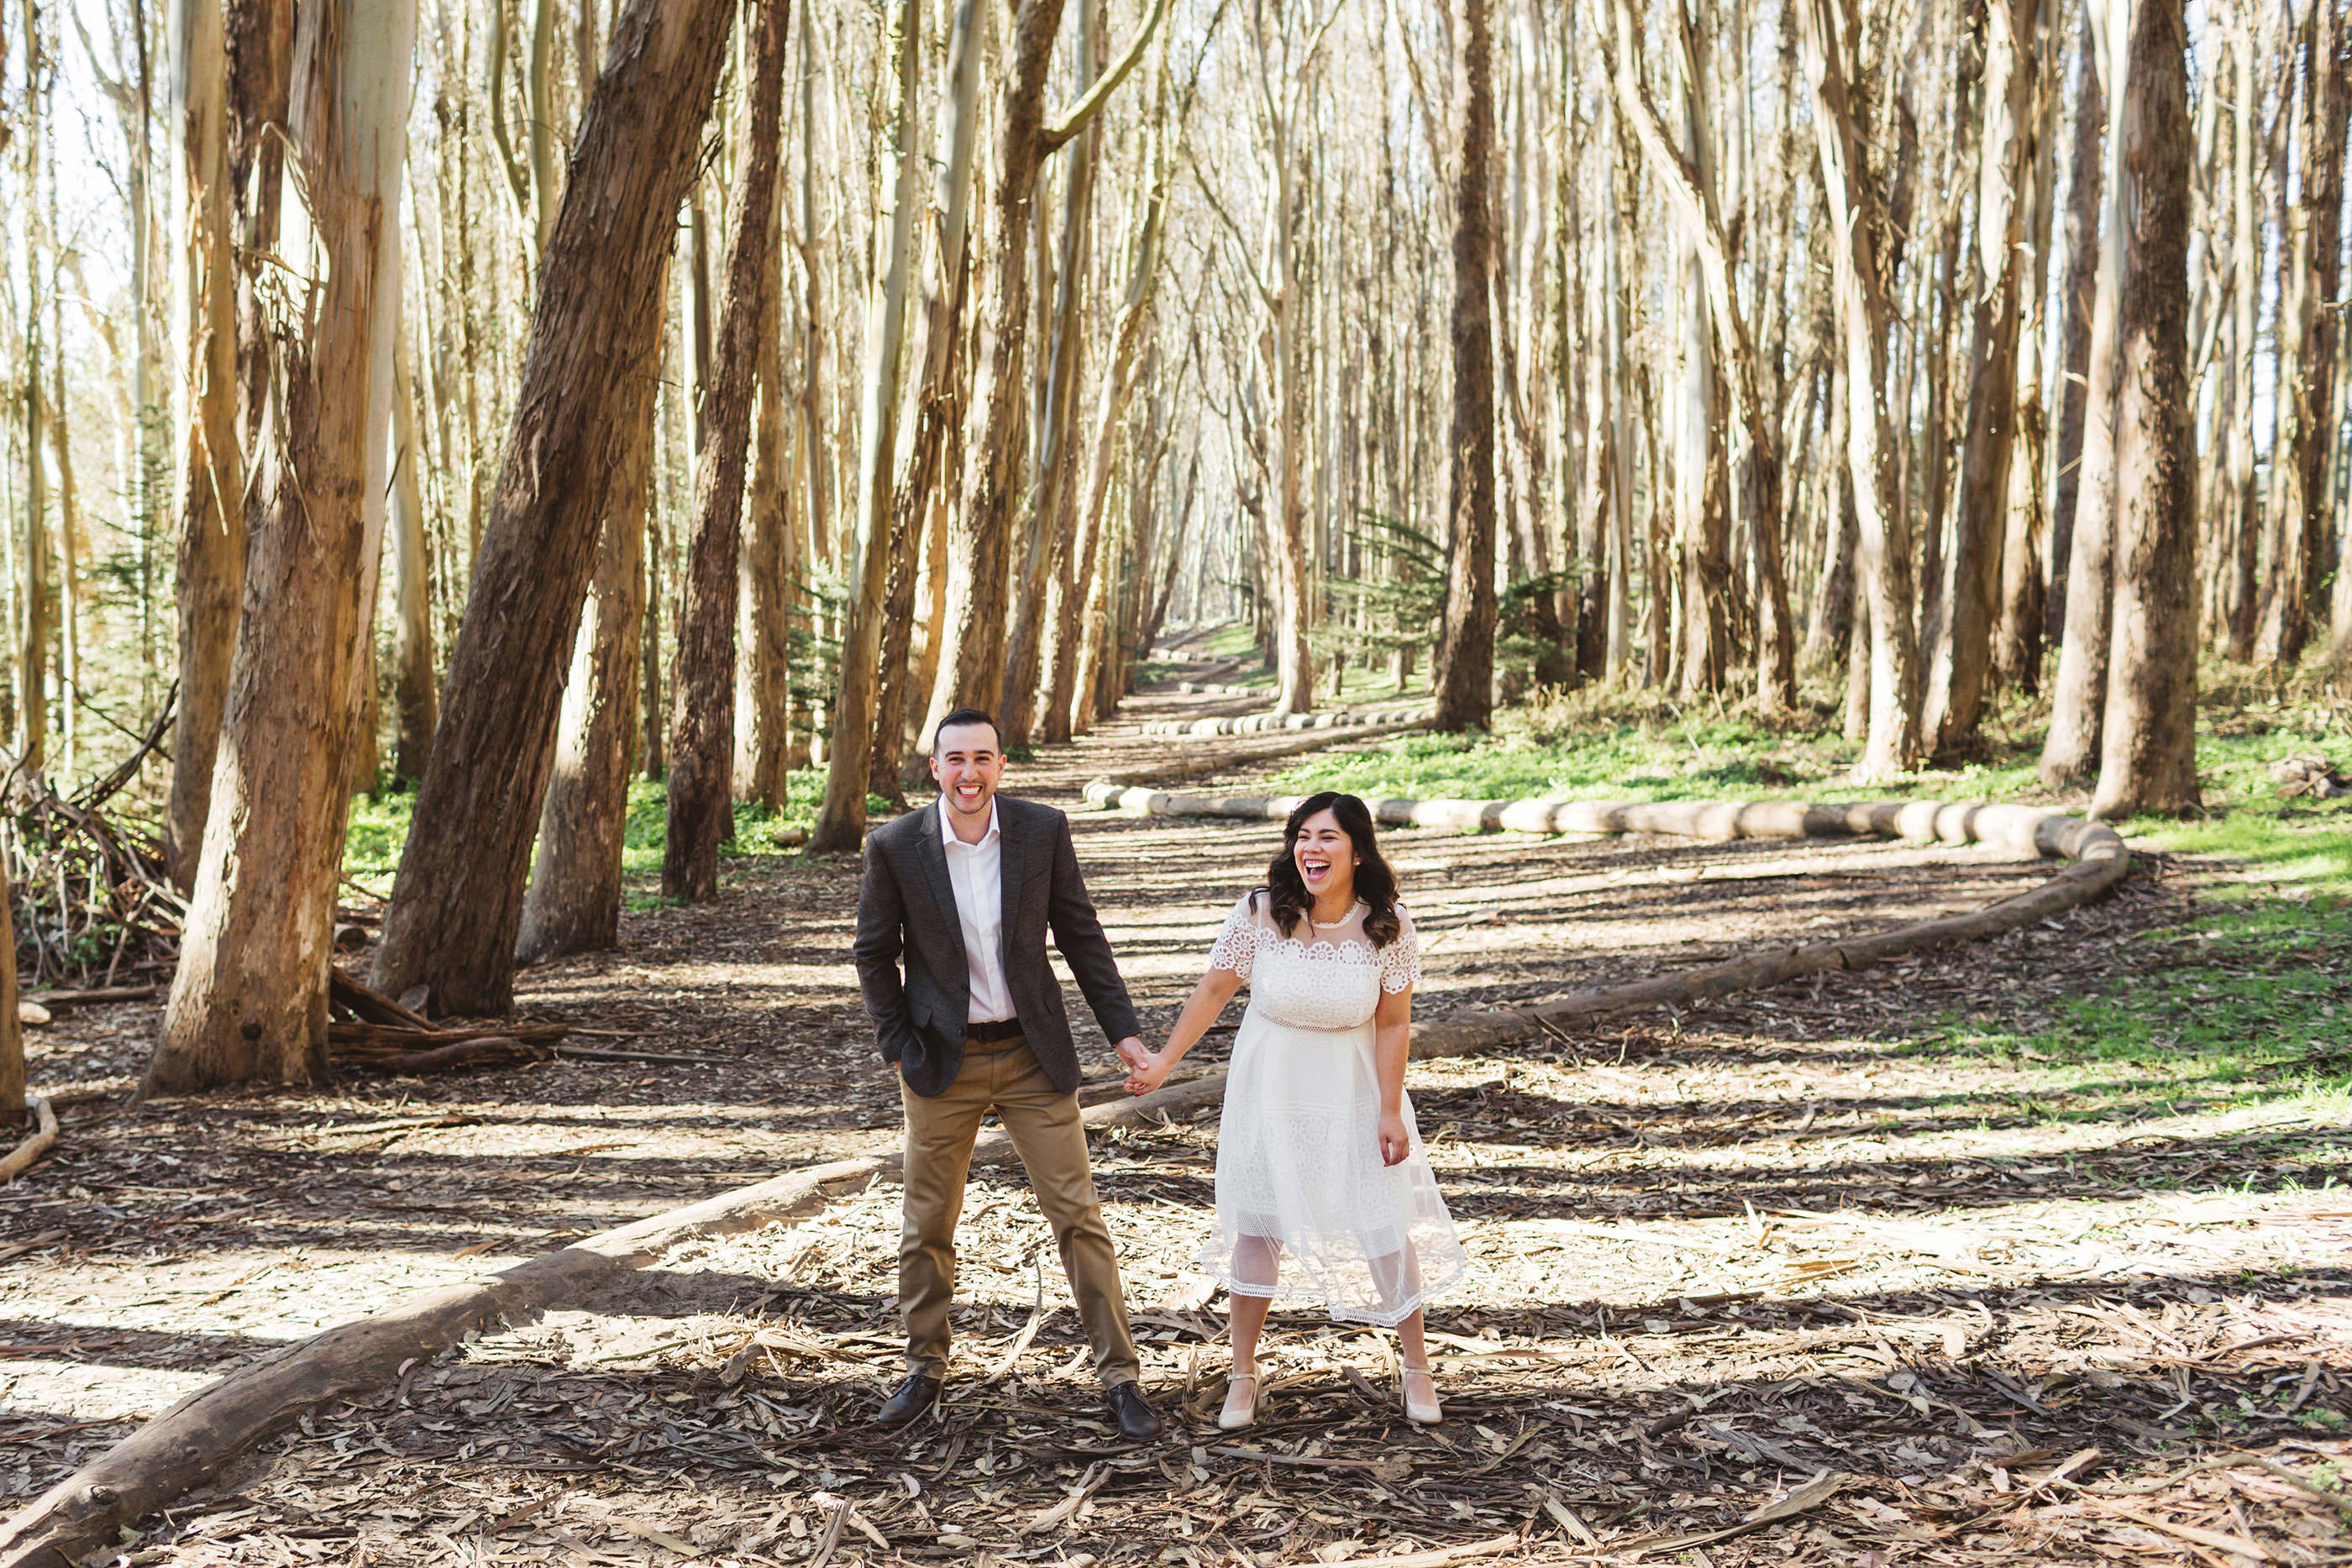 guide to getting your engagement or wedding photos done at lovers' lane, a presidio gem